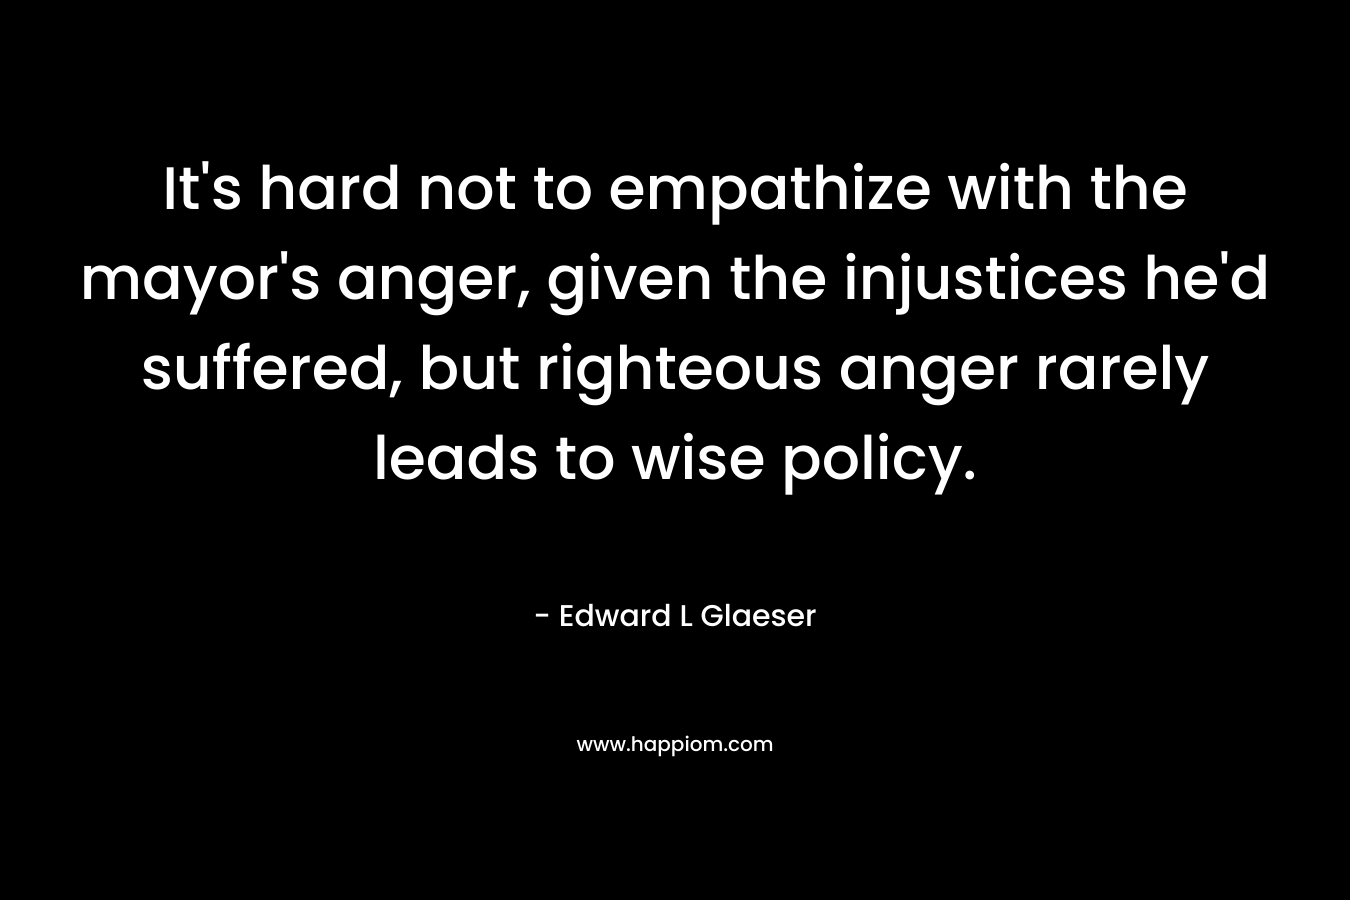 It’s hard not to empathize with the mayor’s anger, given the injustices he’d suffered, but righteous anger rarely leads to wise policy. – Edward L Glaeser